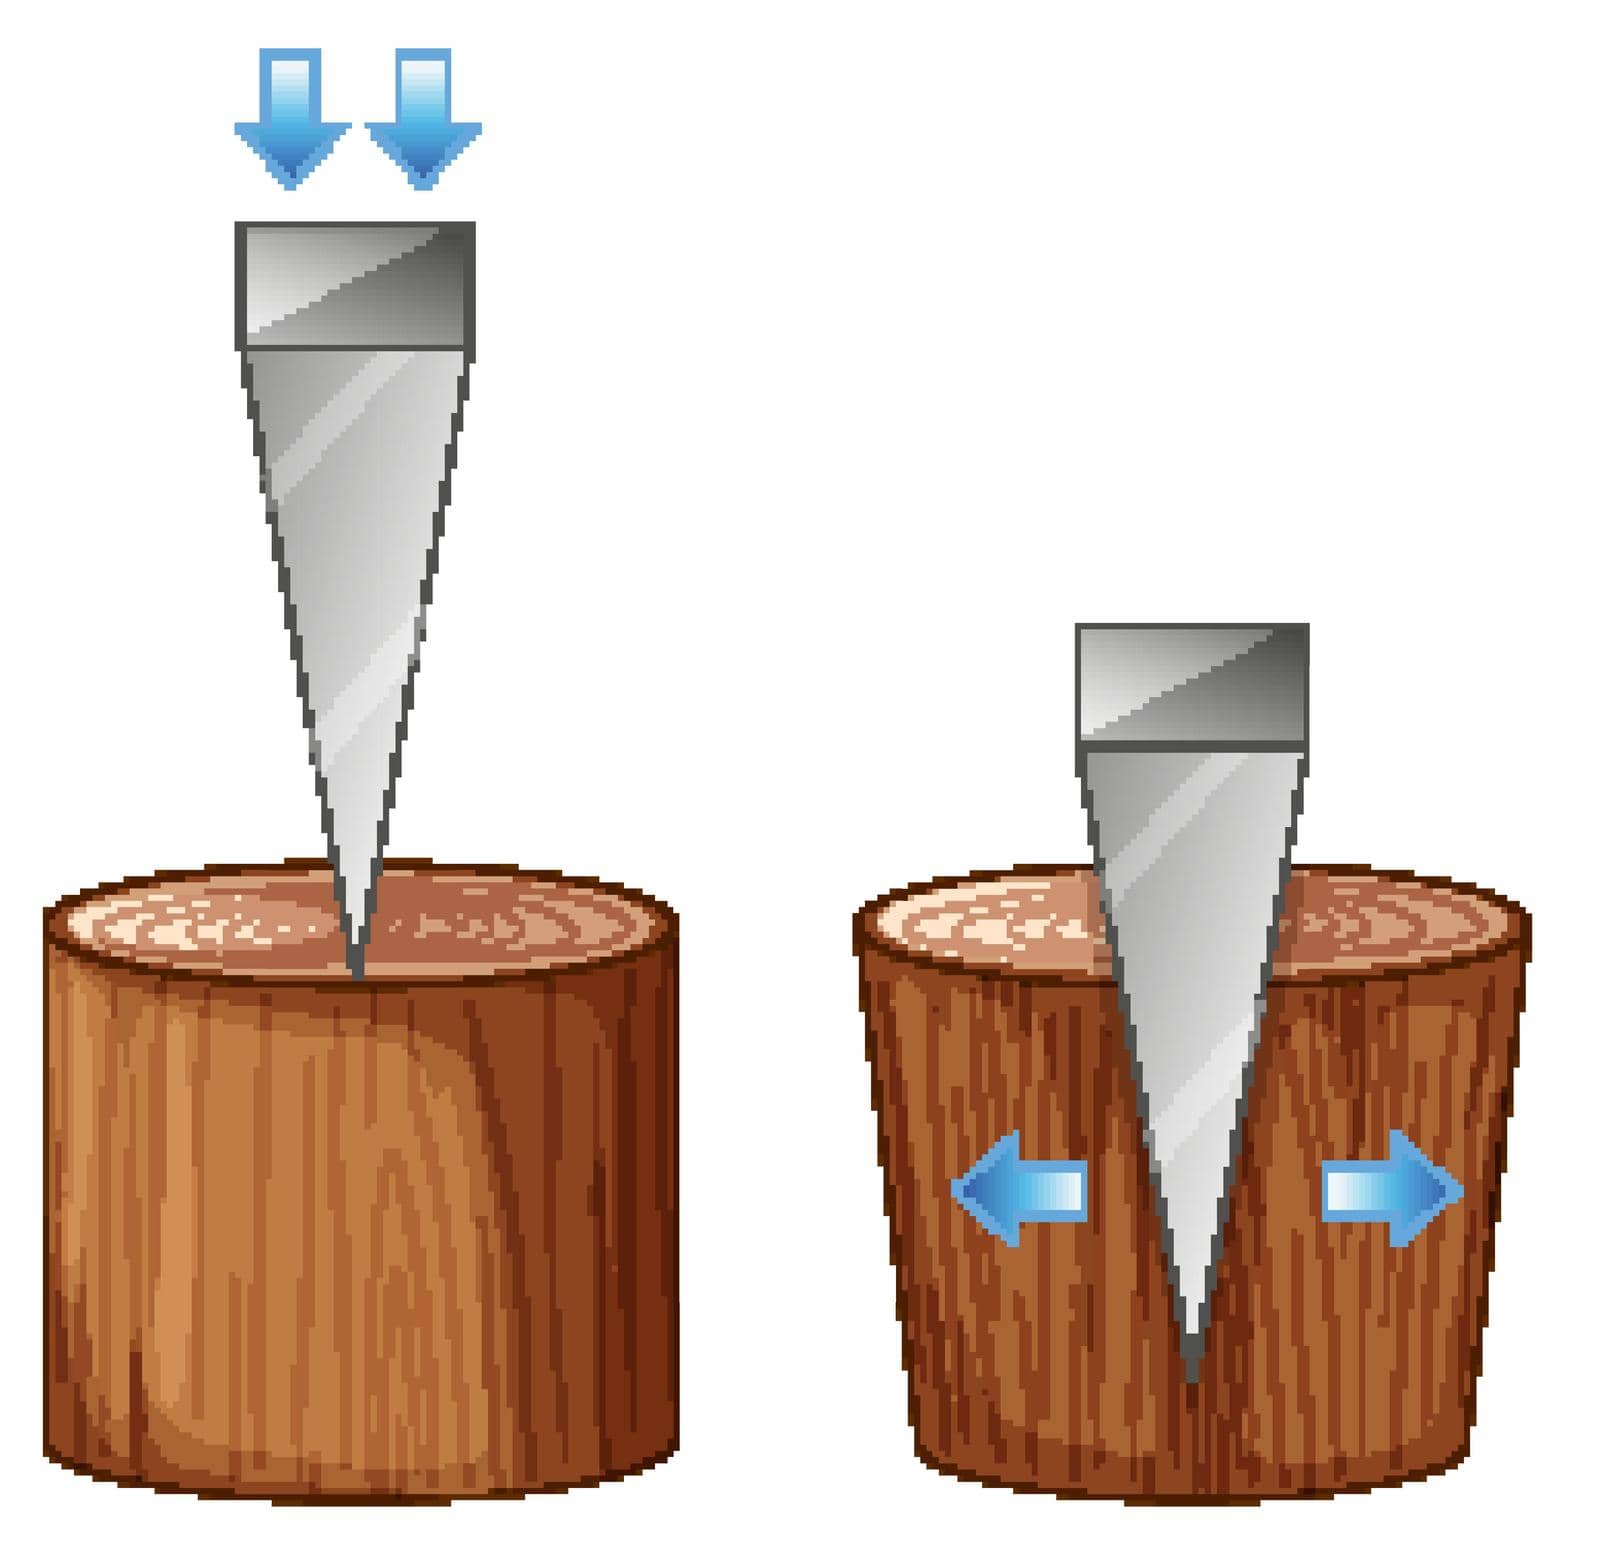 Blades and chopping wood illustration